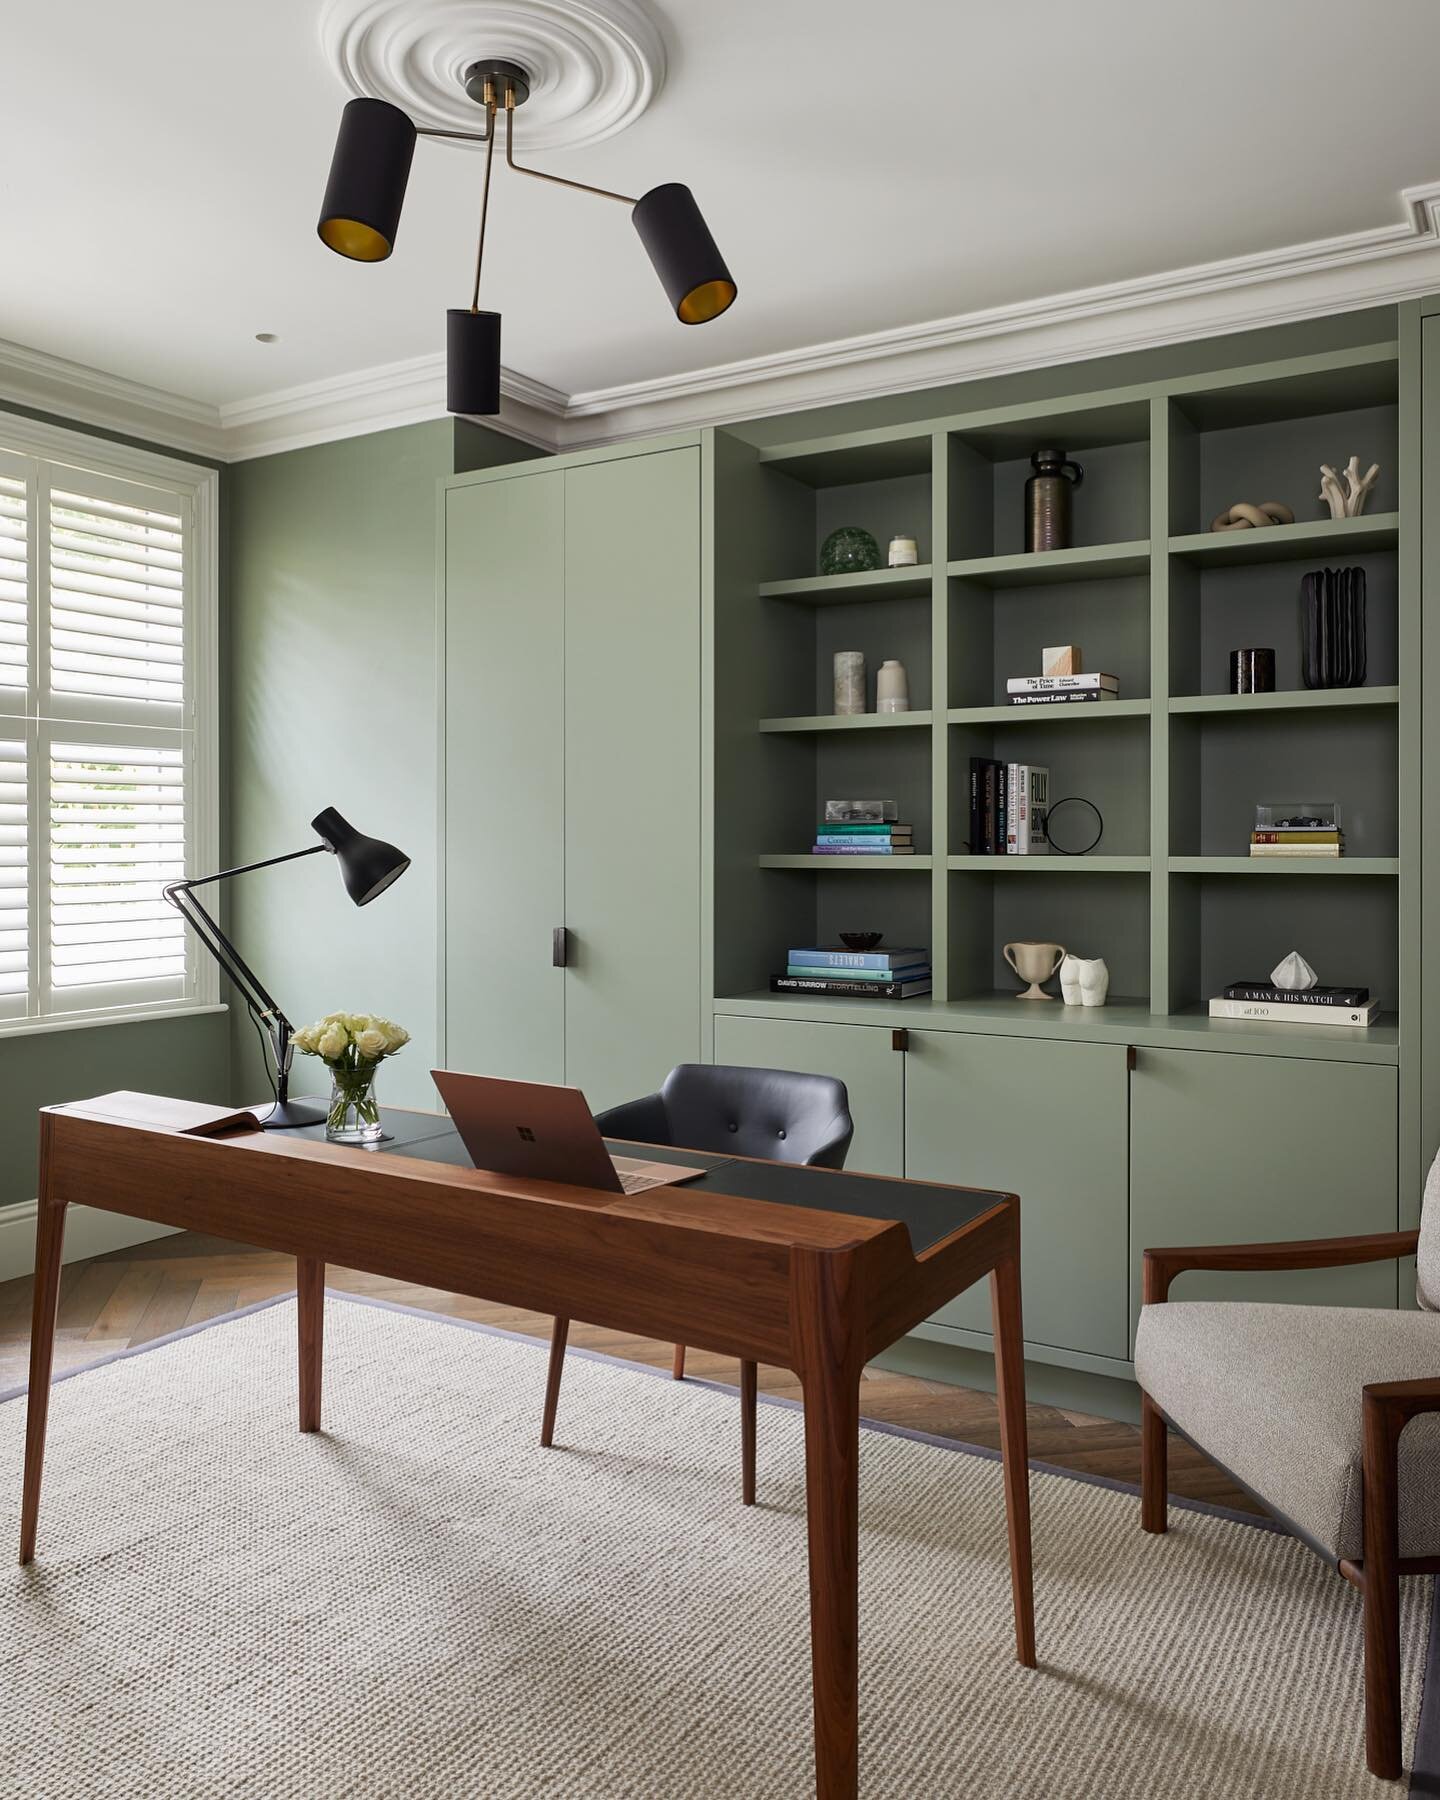 We meticulously plan all our designs down to the nth degree. In this home office, there are no trailing wires thanks to a hollow desk leg, a carefully positioned hole in the rug and and floor sockets. 

The doors of the tall joinery unit slide back t